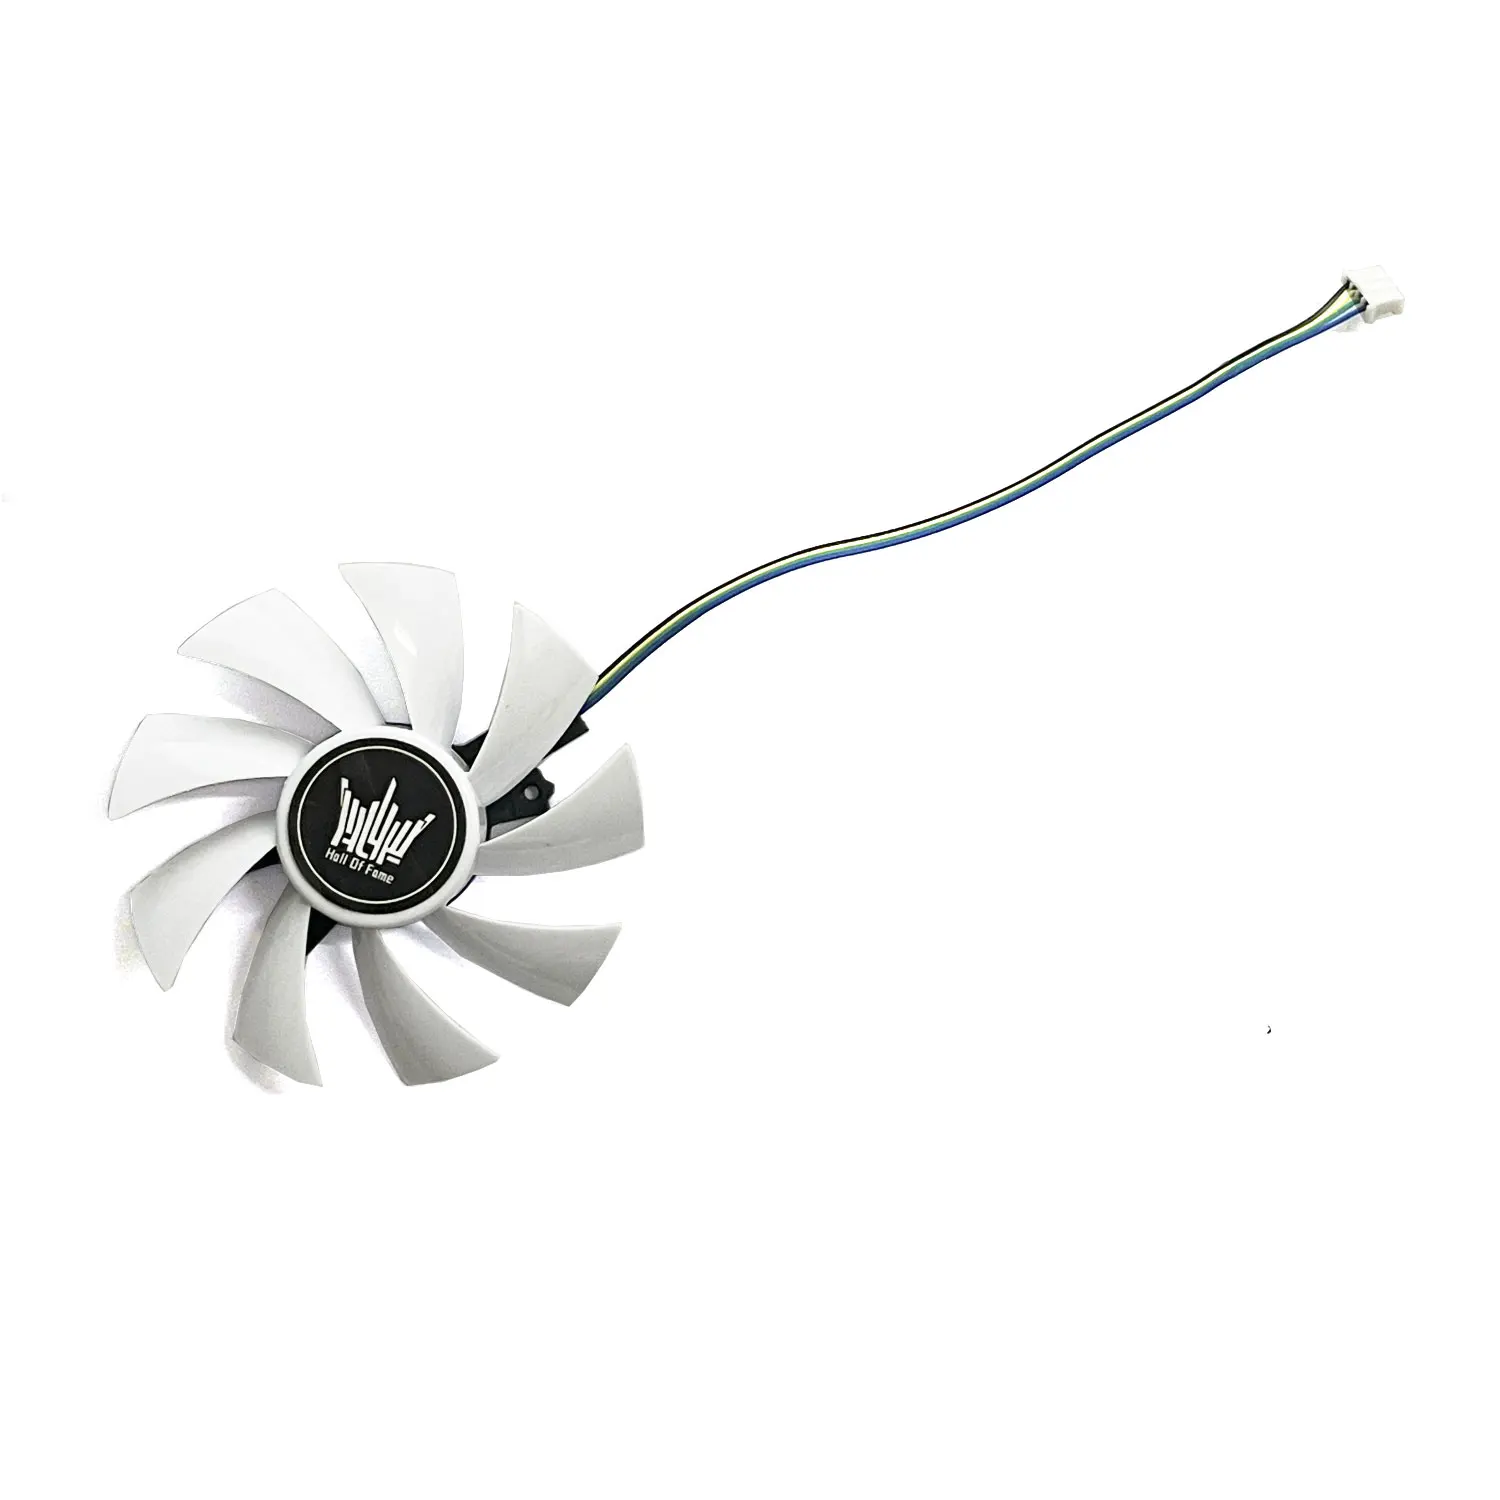 87MM 4PIN GA92S2H DC 12V 0.35A GTX1060 Hall of Fame Graphics Card Fan Replacement For Galax GTX 1060 1070 1080 Ti HOF GPU Cooler images - 6